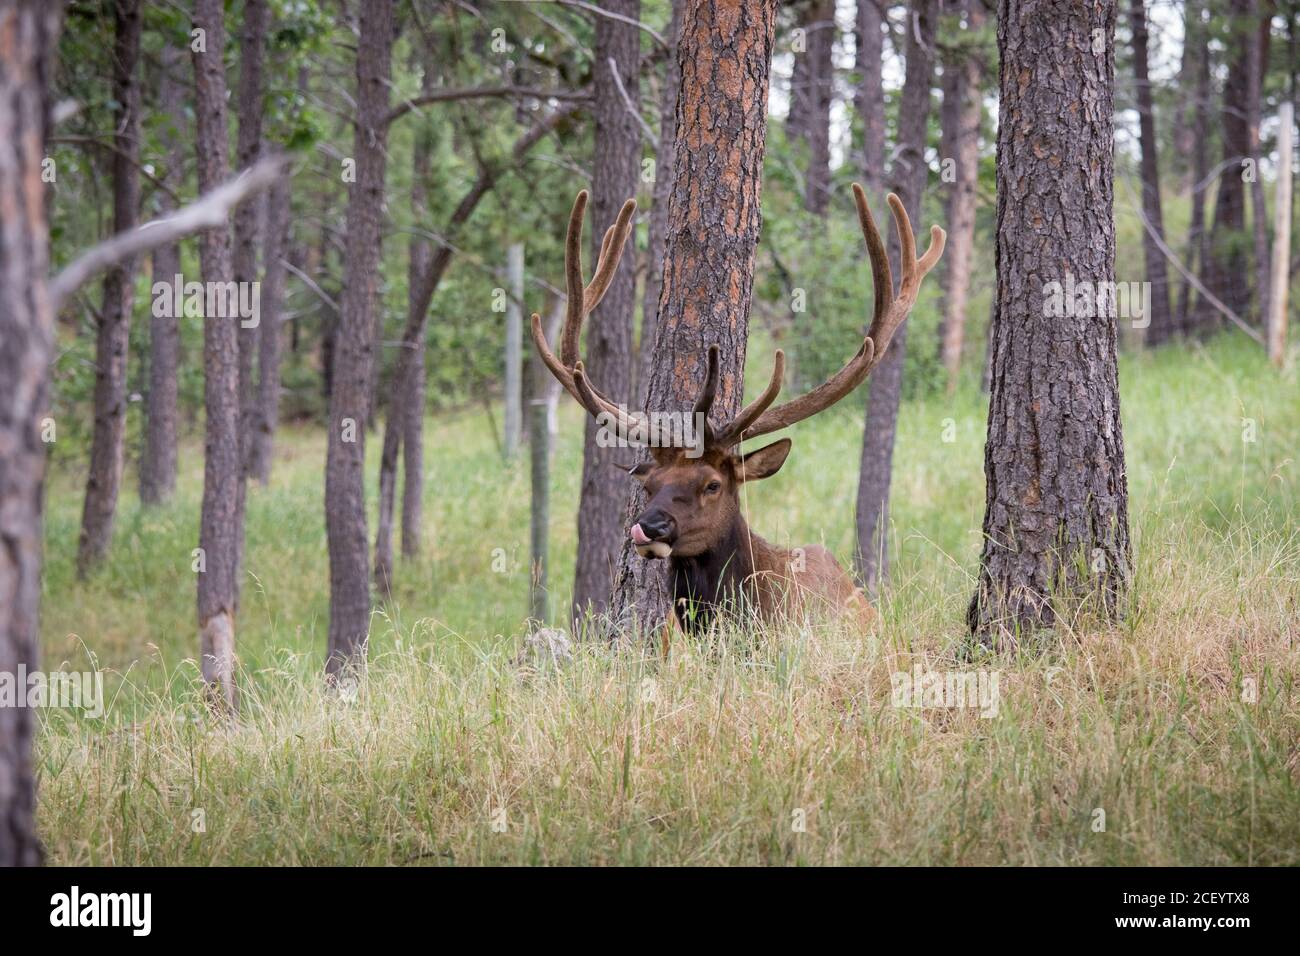 Bulle Elche liegt in hohem Gras in Bear Country USA, SD Stockfoto